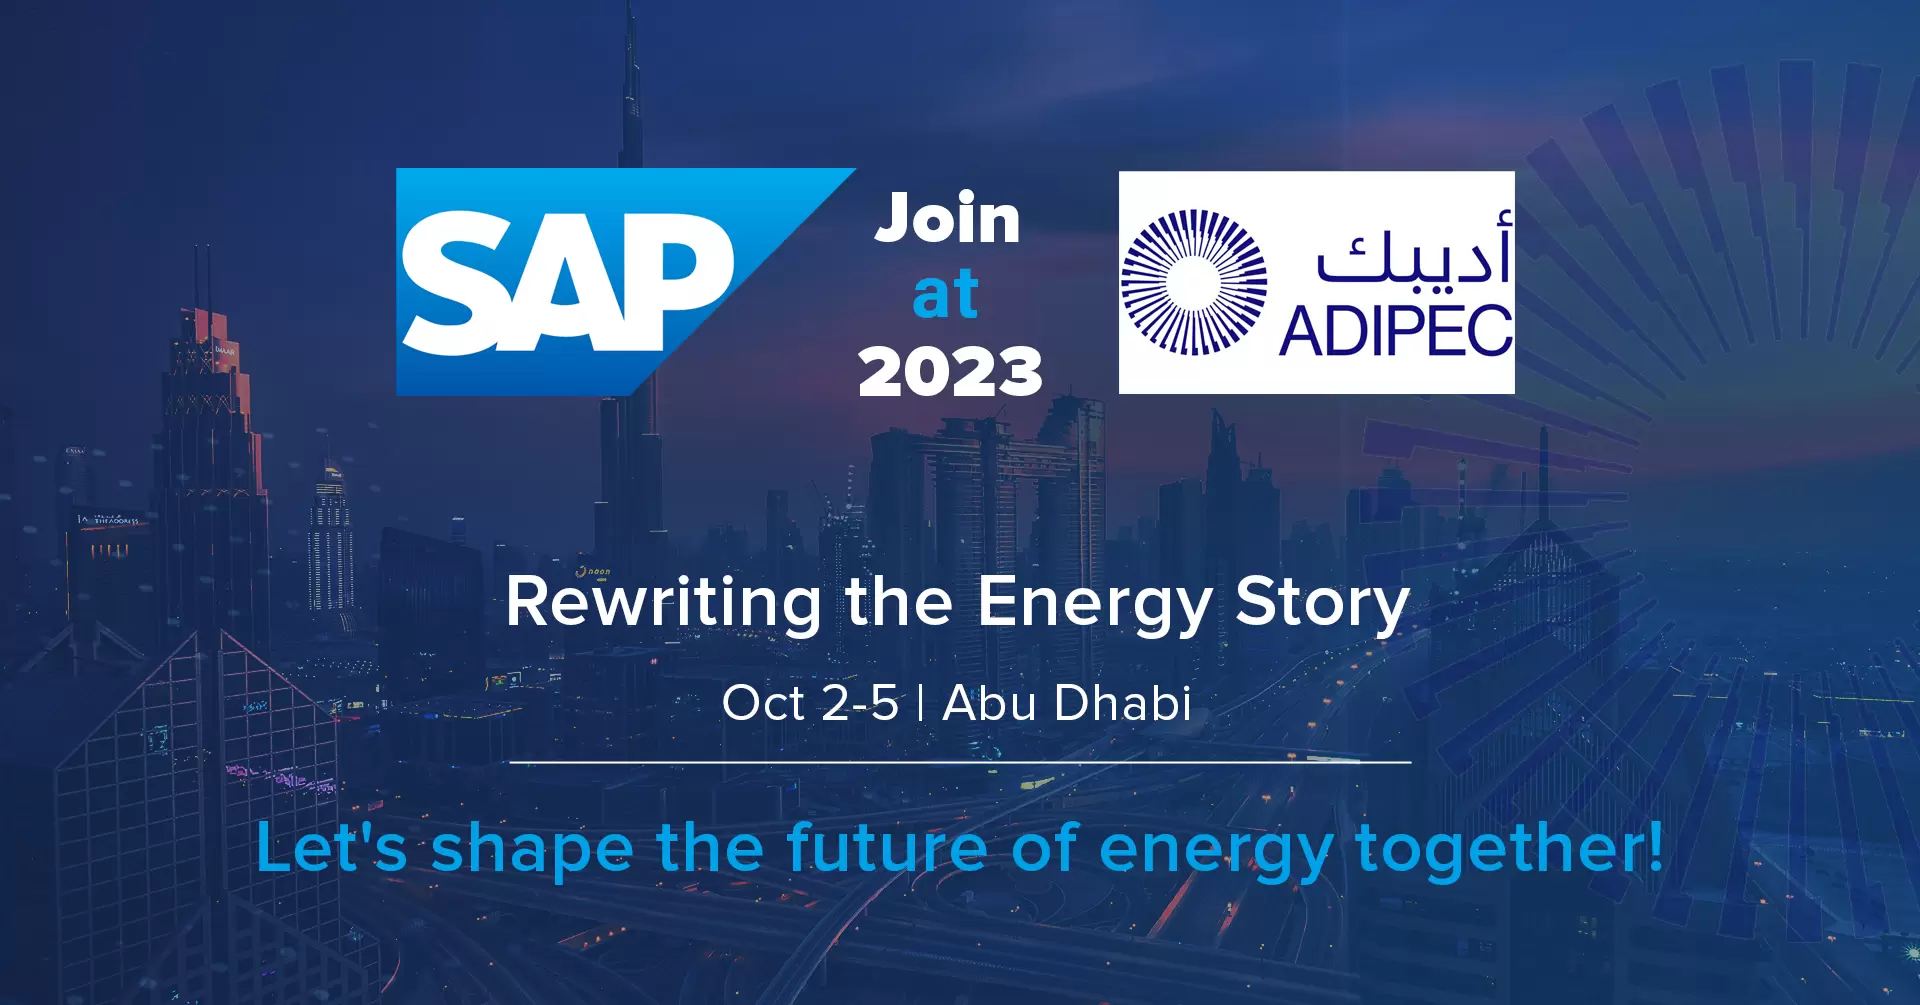 ADIPEC 2023- Join SAP in Rewriting the Energy Story